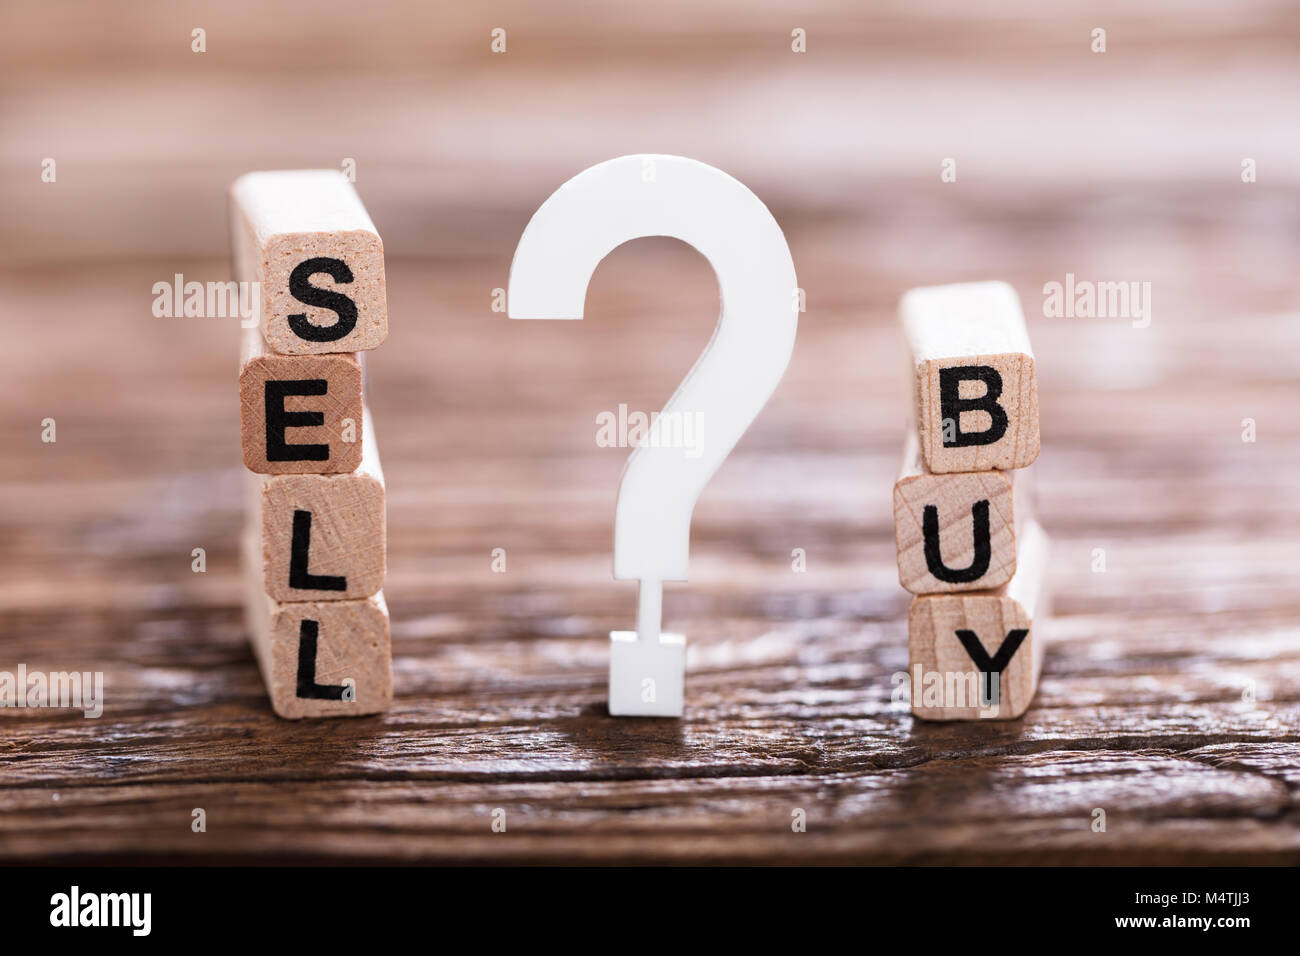 Close-up Of Buy Or Sell Option On Wooden Block With White Question Mark Sign Stock Photo